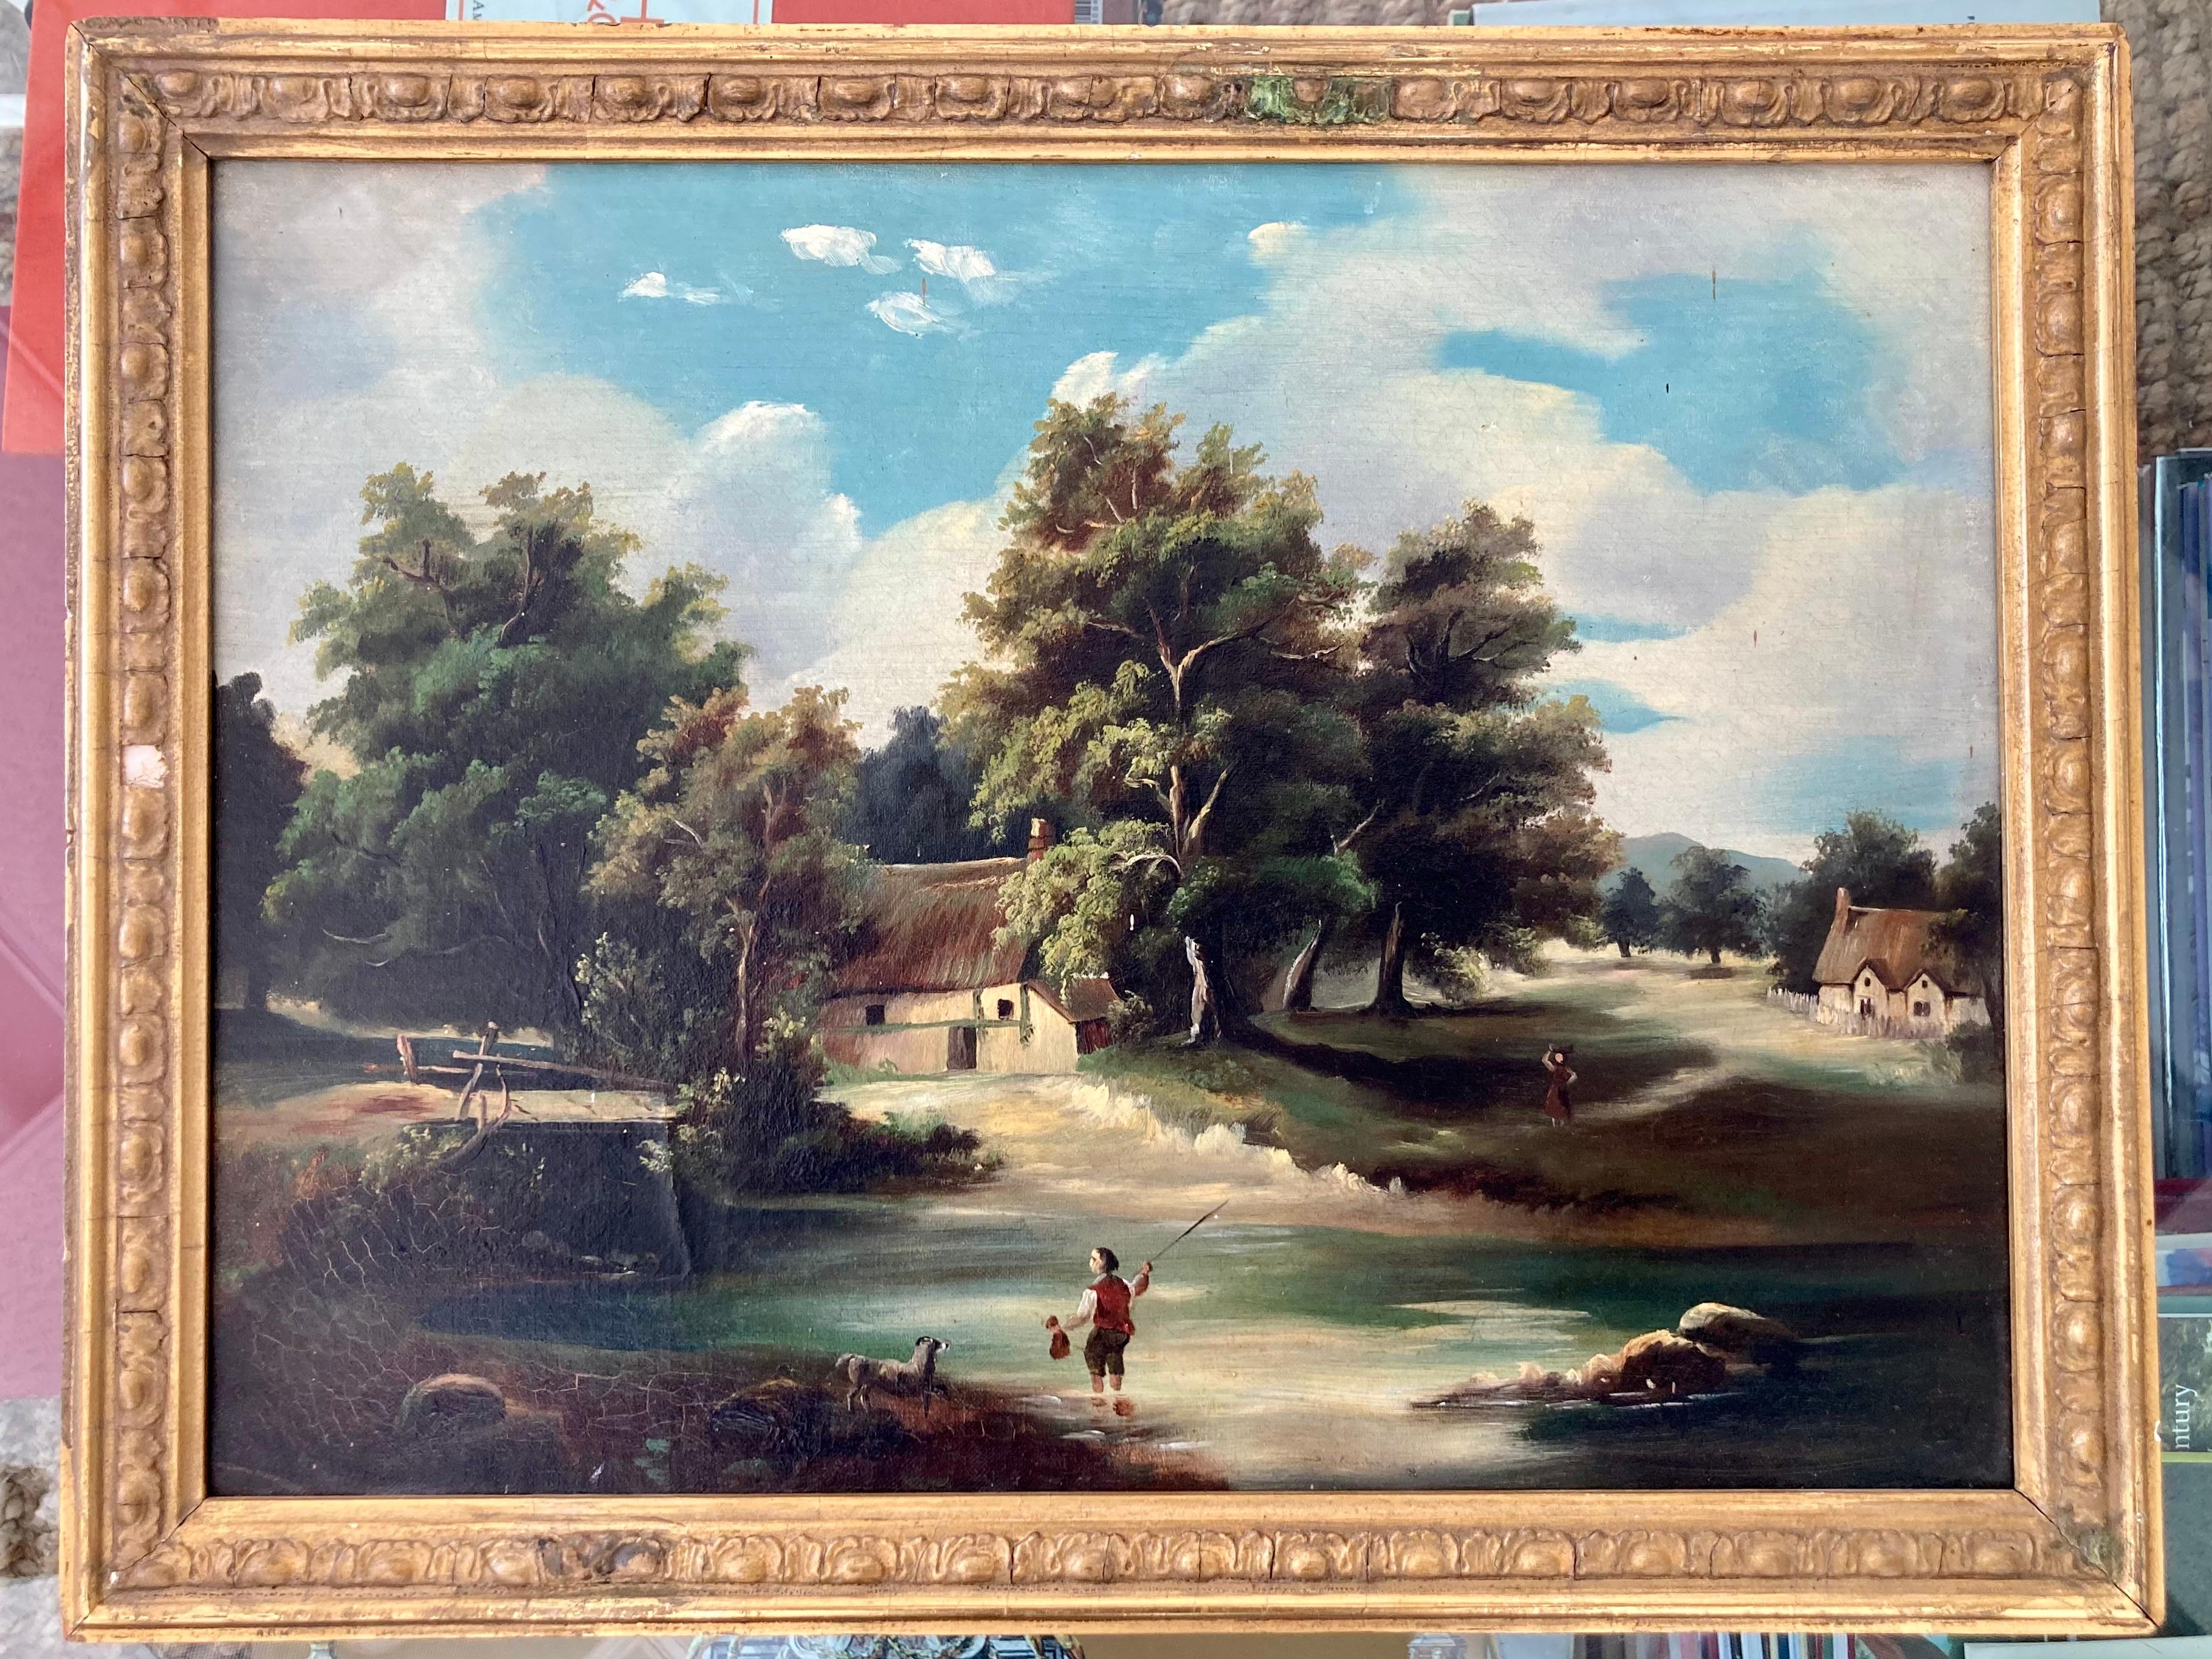 Beautiful French 19th Century landscape painting. Old wood original stretchers . Nice old gilt frame too.

Sight dimensions: 15.5